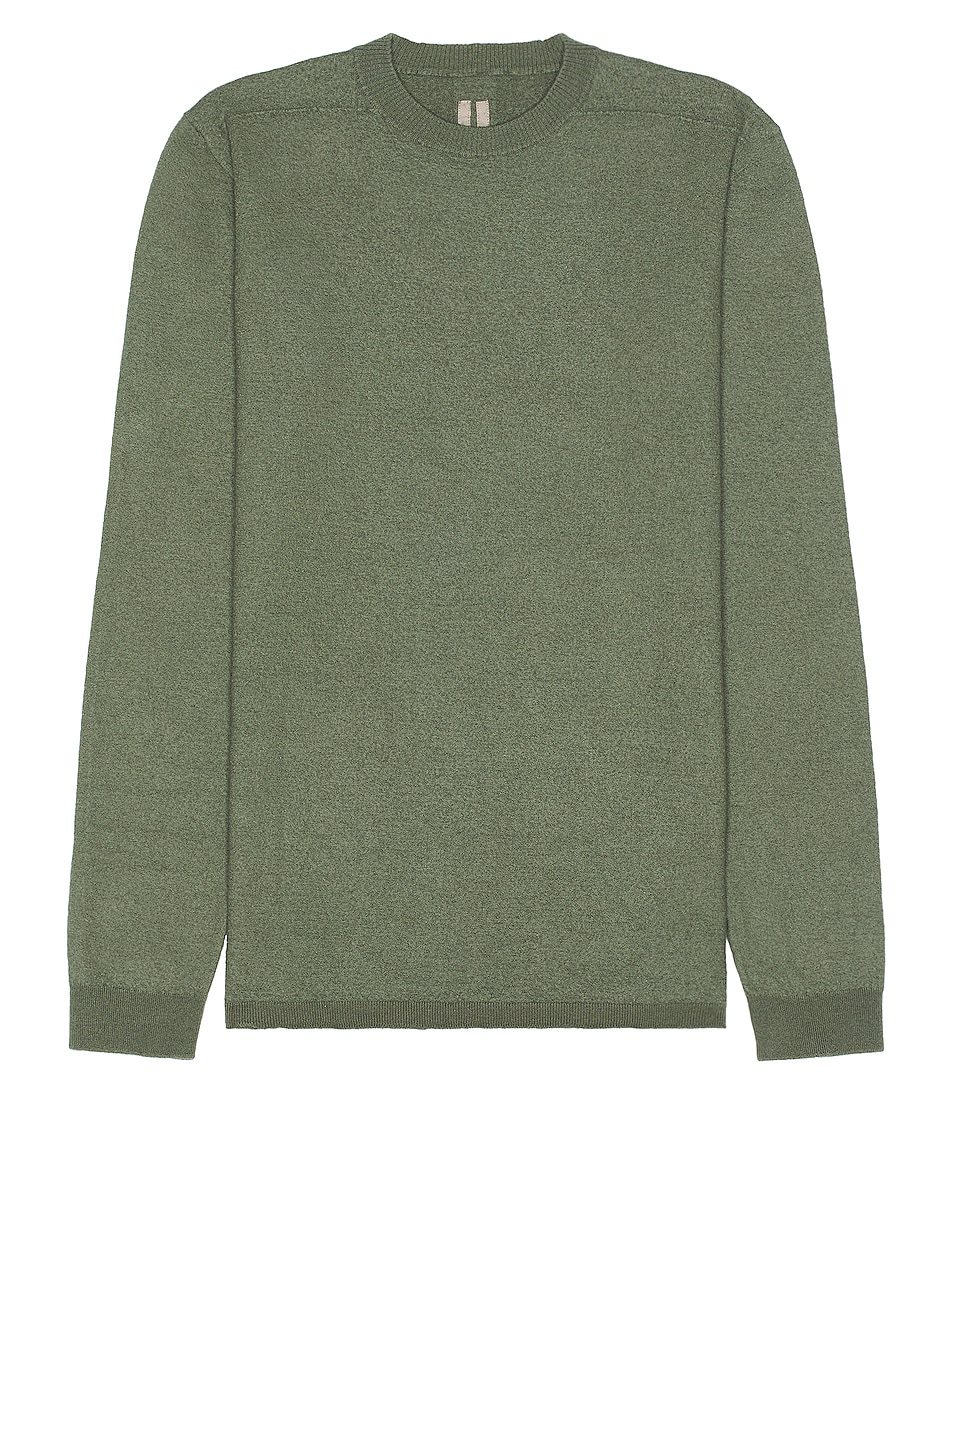 Image 1 of Rick Owens Biker Level Round Neck Sweater in Moss